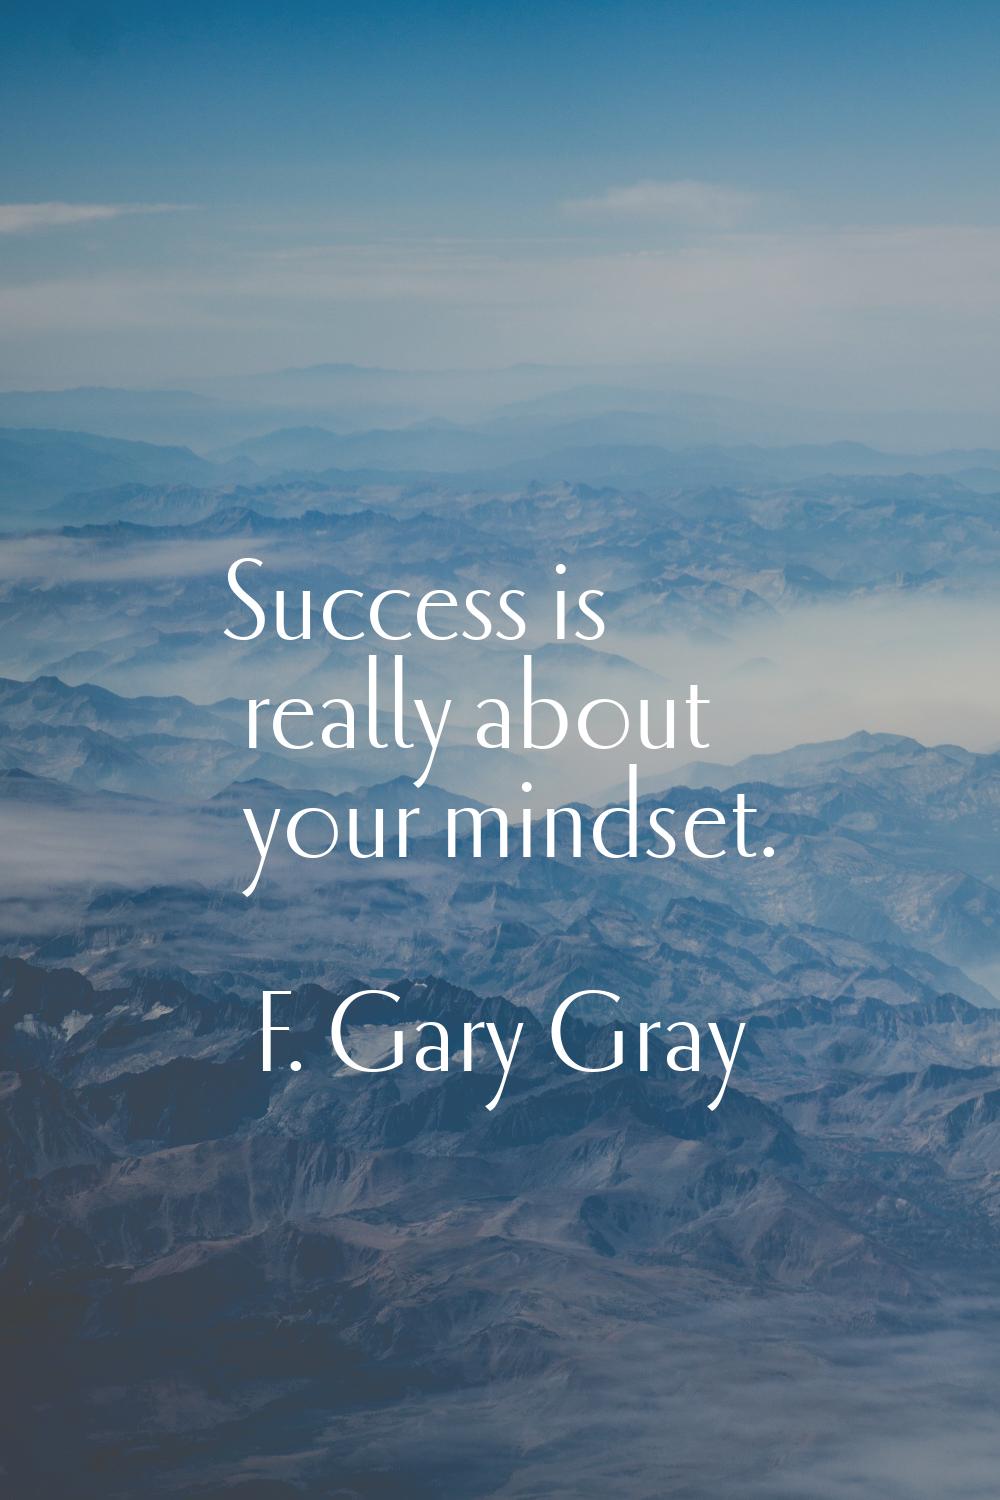 Success is really about your mindset.